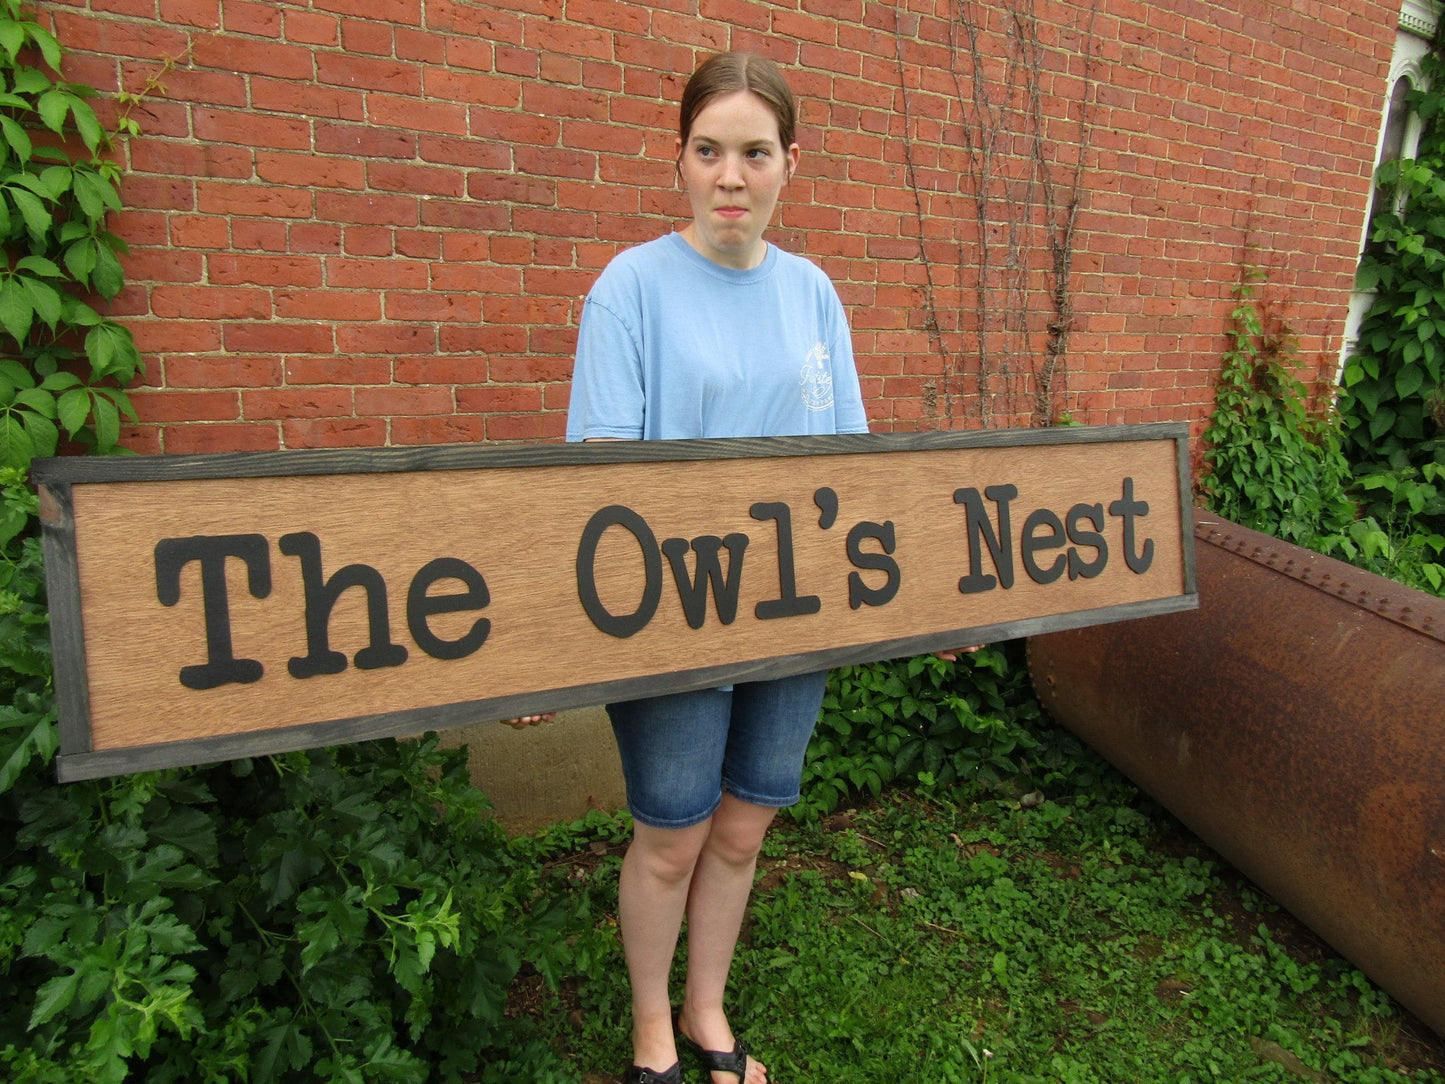 Oversized Large Custom Wooden Sign The Owls Nest Outdoors Commerical Professional Signage Personalized Typewriter Font Bird Handmade 3D